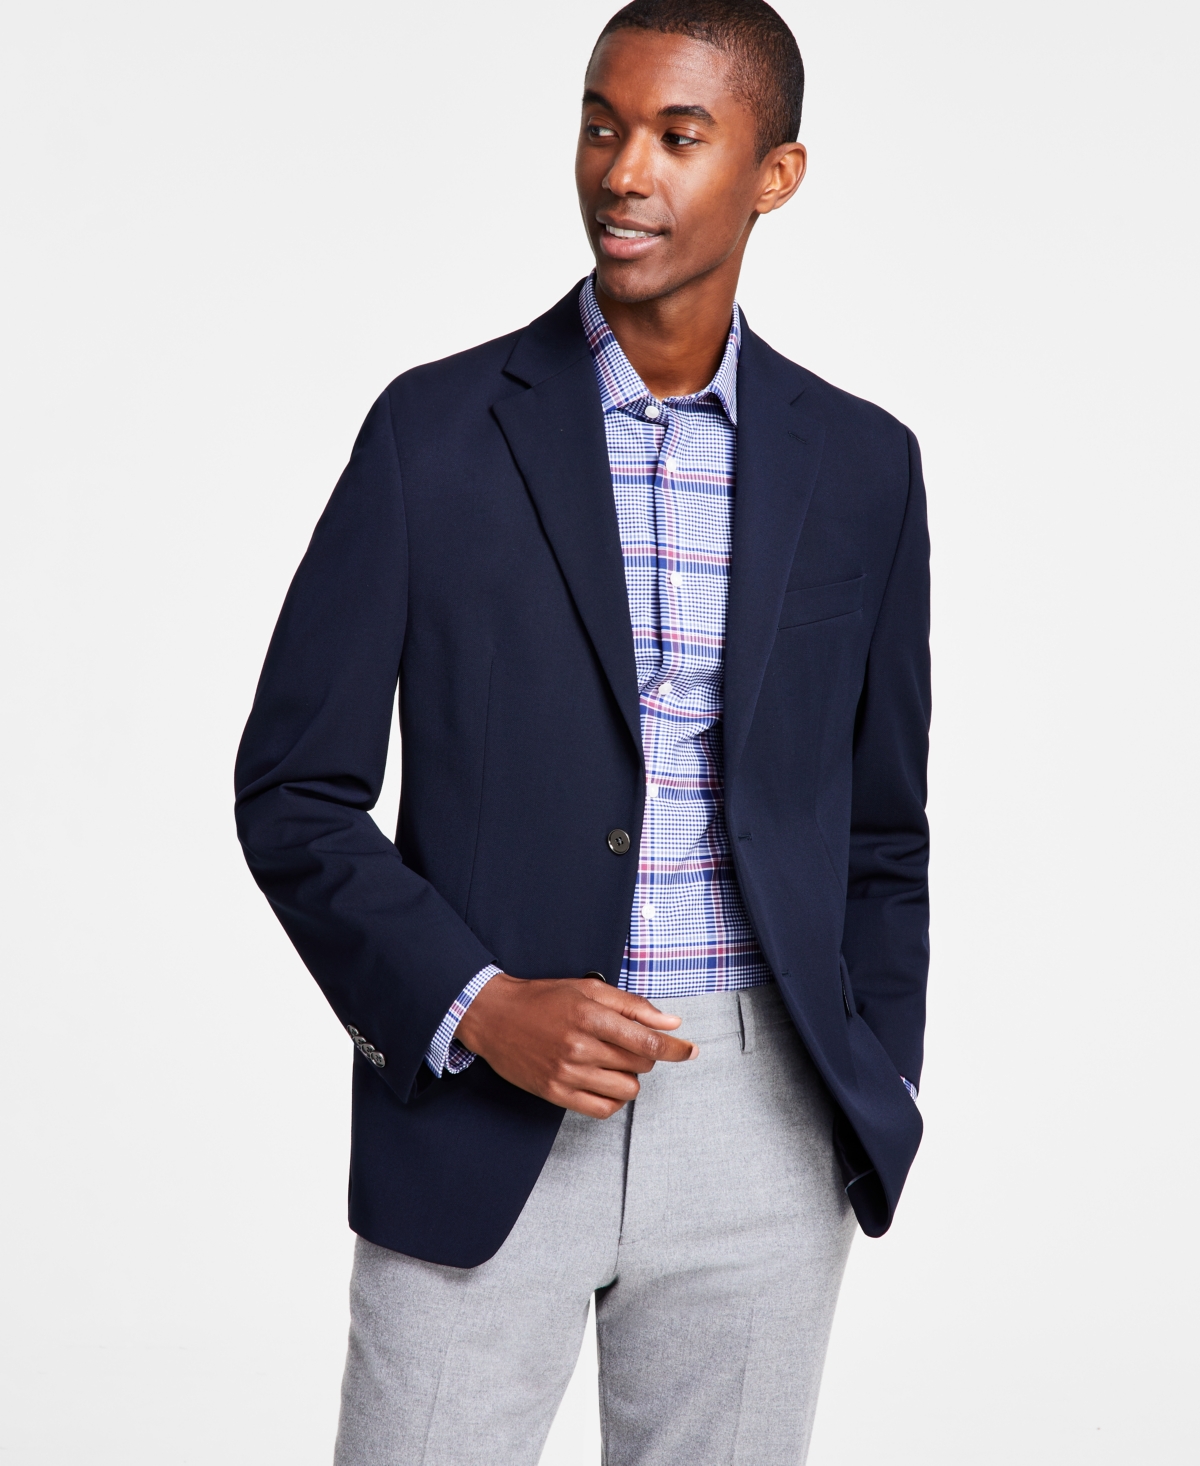 Men's Classic-Fit Stretch Solid Blazers - Navy